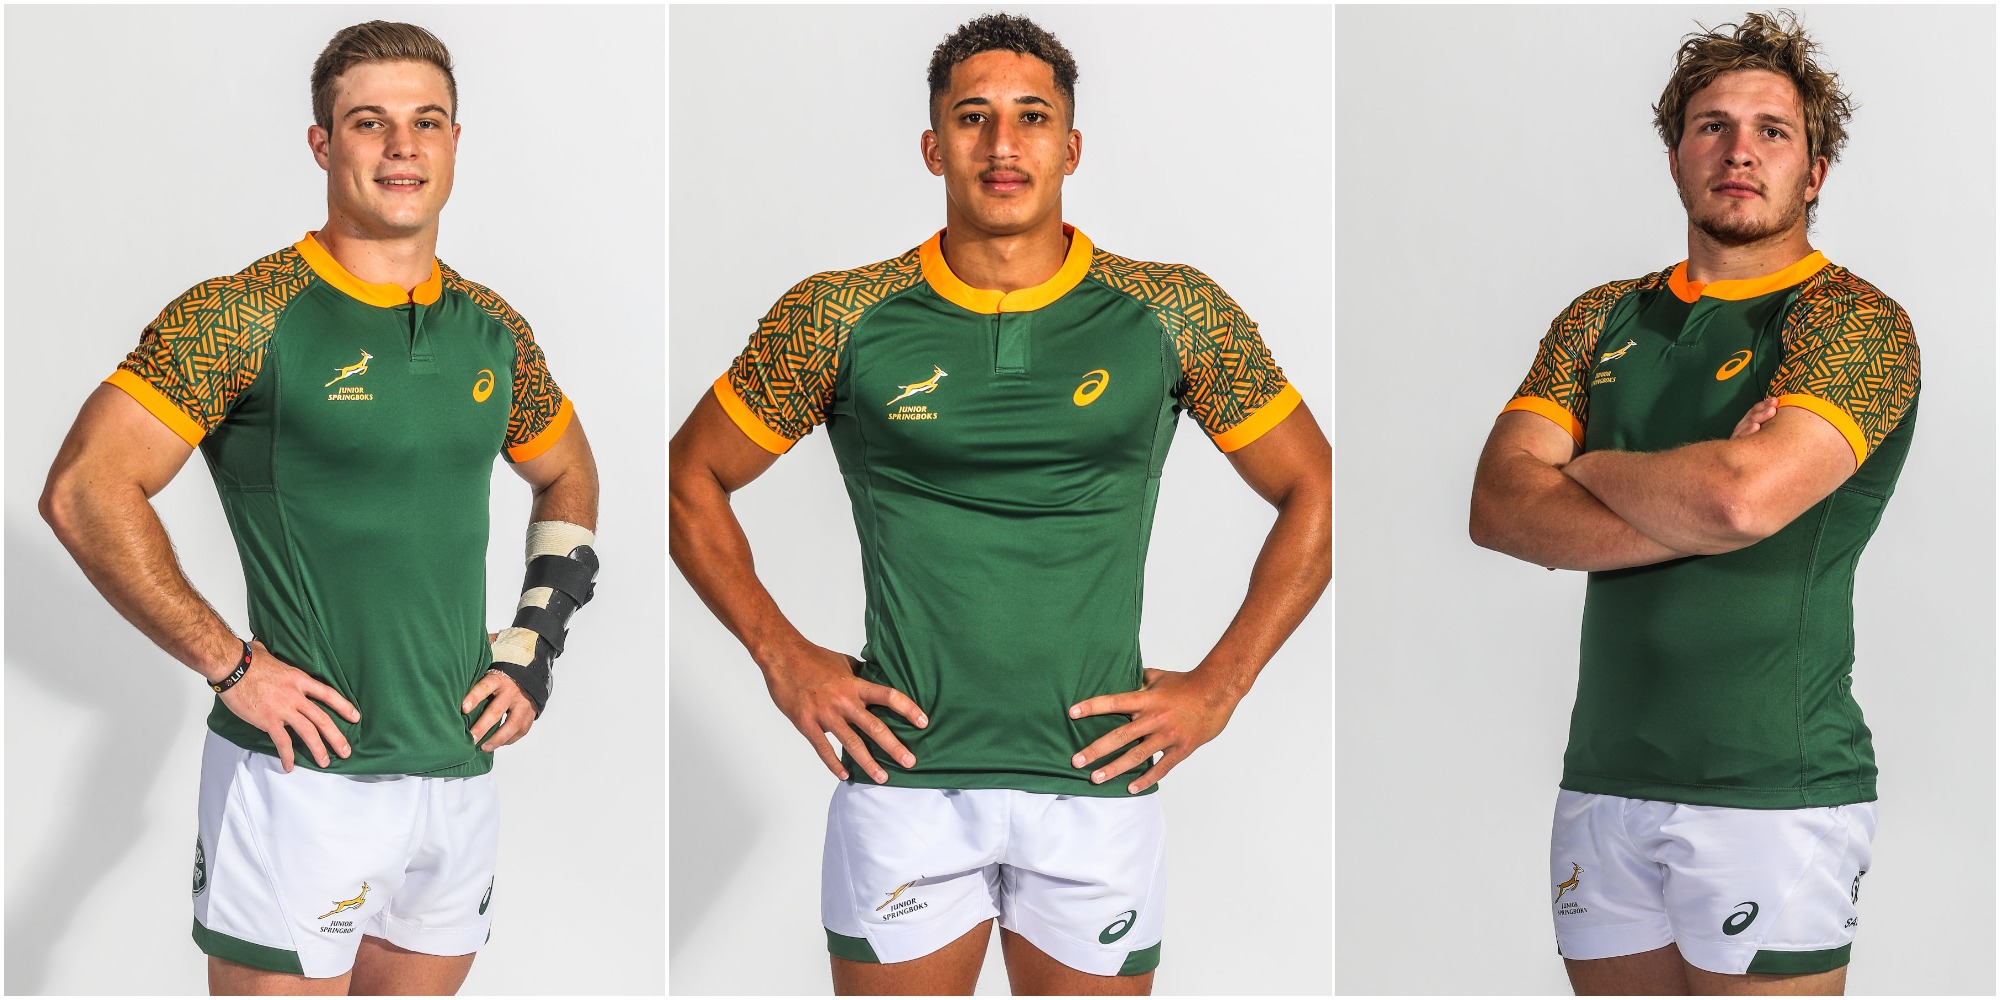 Junior Springbok Player of the Year nominees (left to right): Van Wyk, Hendrikse and Wessels.